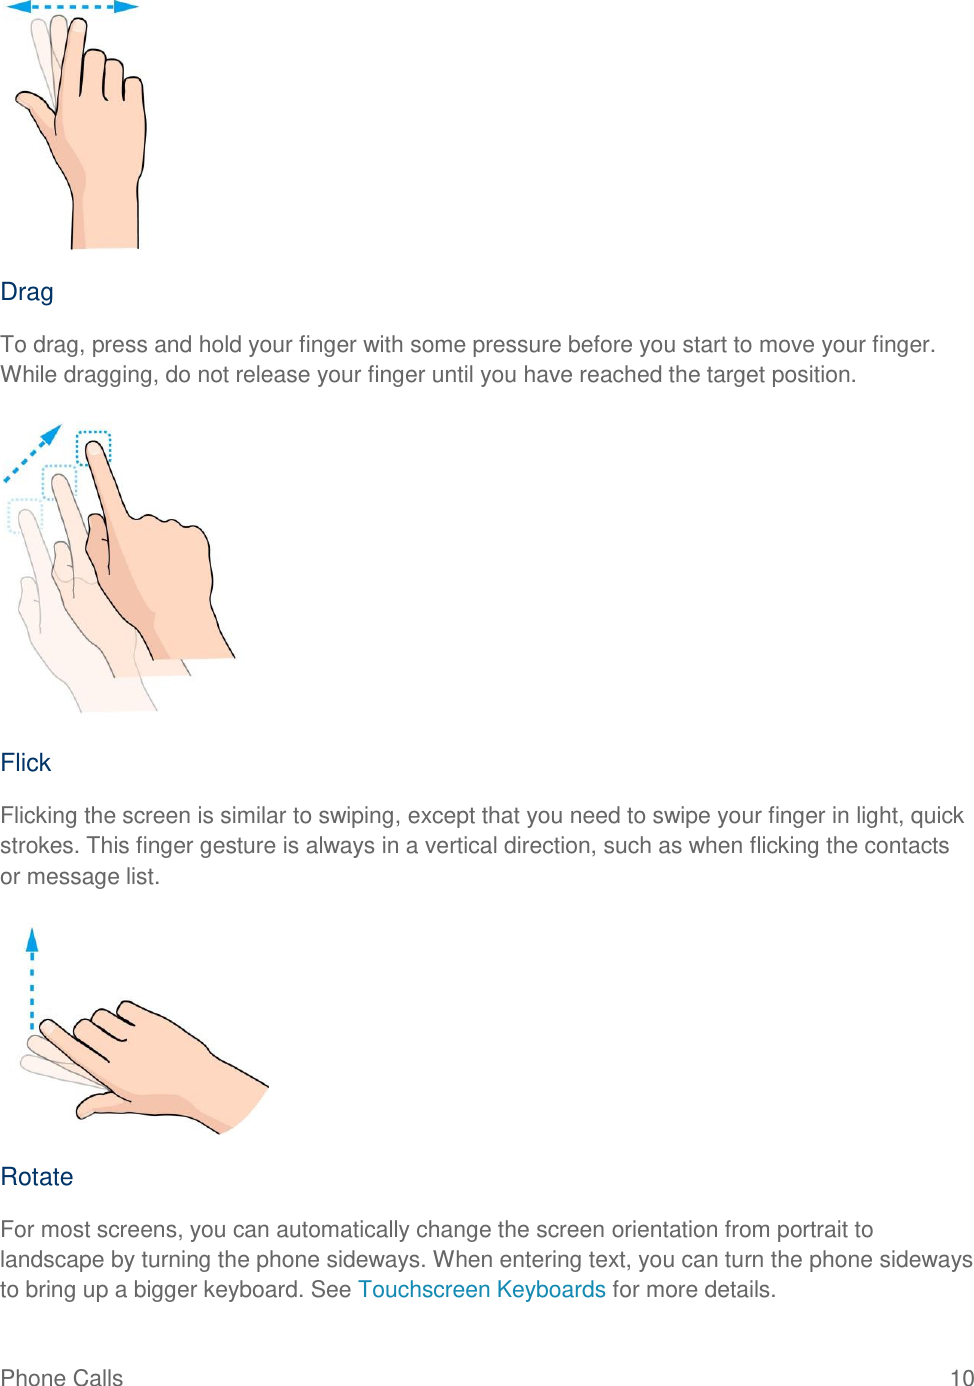 Phone Calls  10   Drag To drag, press and hold your finger with some pressure before you start to move your finger. While dragging, do not release your finger until you have reached the target position.   Flick Flicking the screen is similar to swiping, except that you need to swipe your finger in light, quick strokes. This finger gesture is always in a vertical direction, such as when flicking the contacts or message list.   Rotate For most screens, you can automatically change the screen orientation from portrait to landscape by turning the phone sideways. When entering text, you can turn the phone sideways to bring up a bigger keyboard. See Touchscreen Keyboards for more details. 